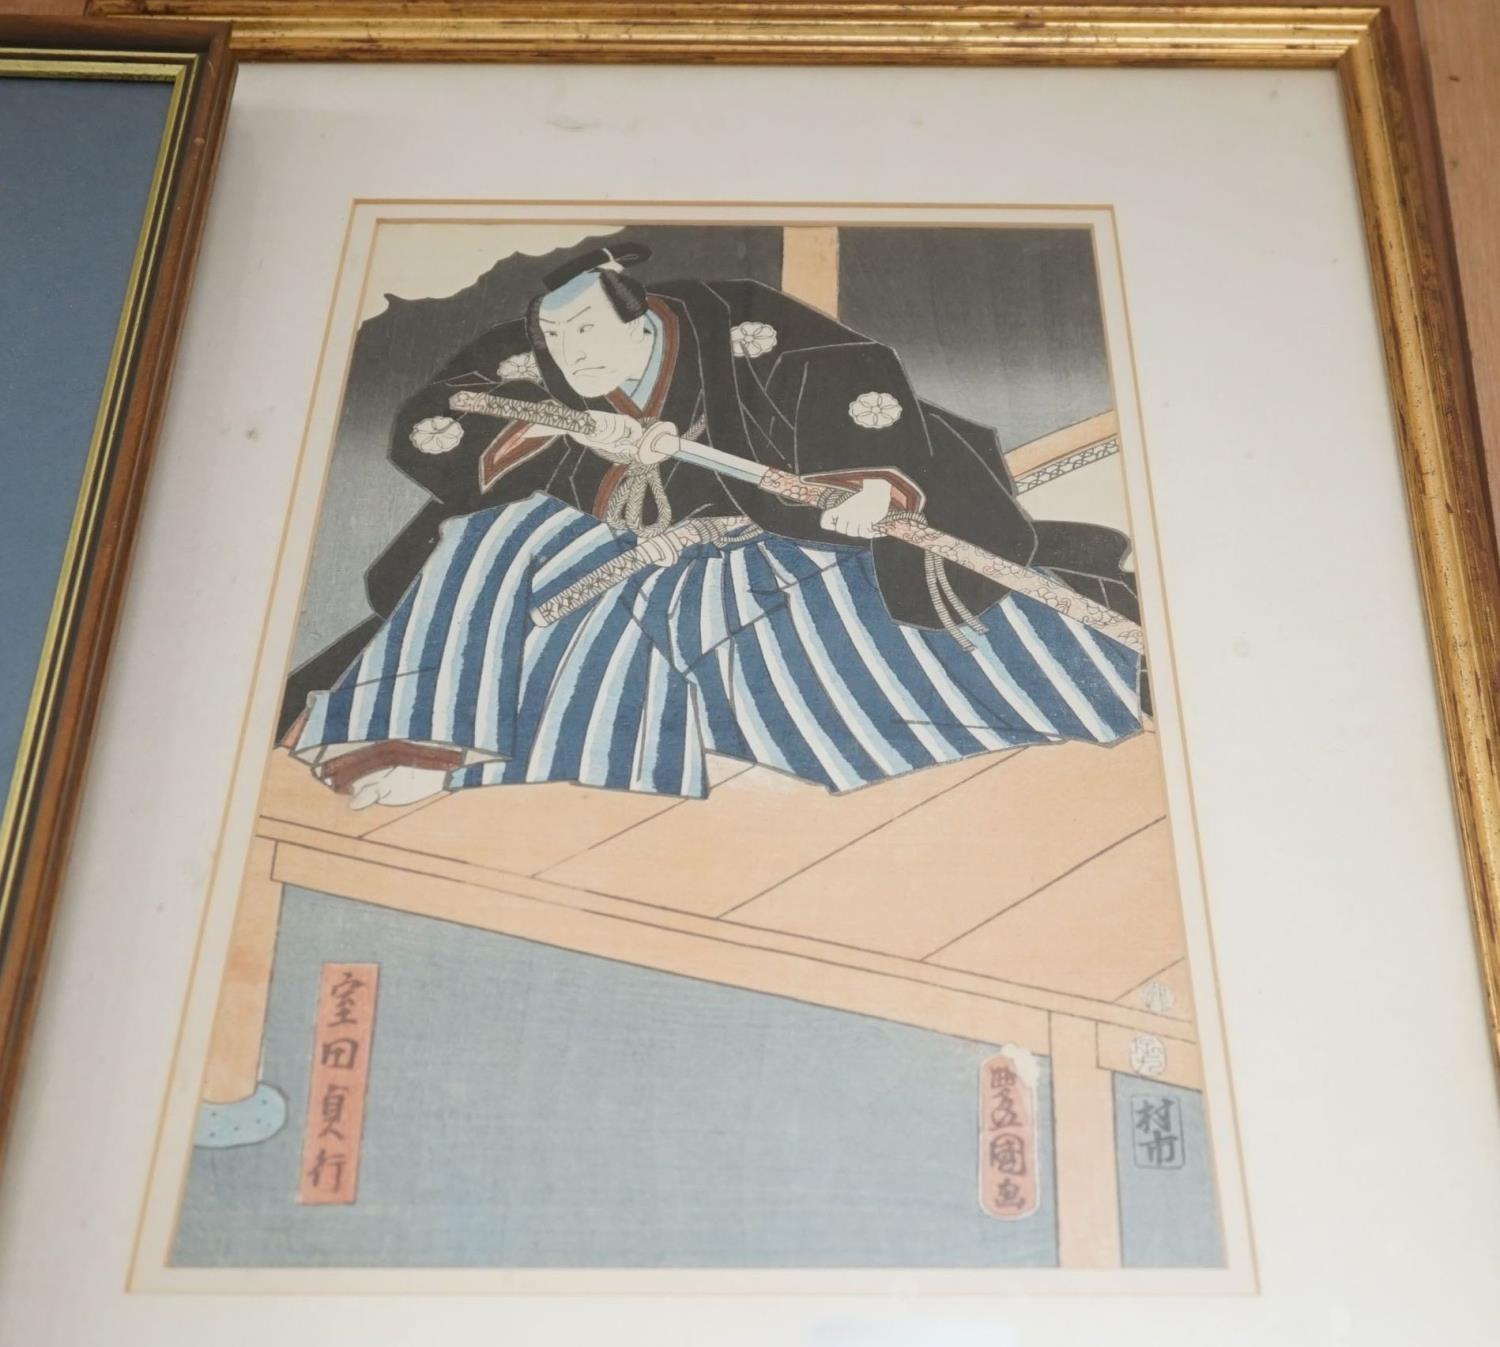 Kunisada, woodblock print, Samurai on a jetty, 33 x 23cm and another print of a Samurai, 36 x 23cm - Image 3 of 3